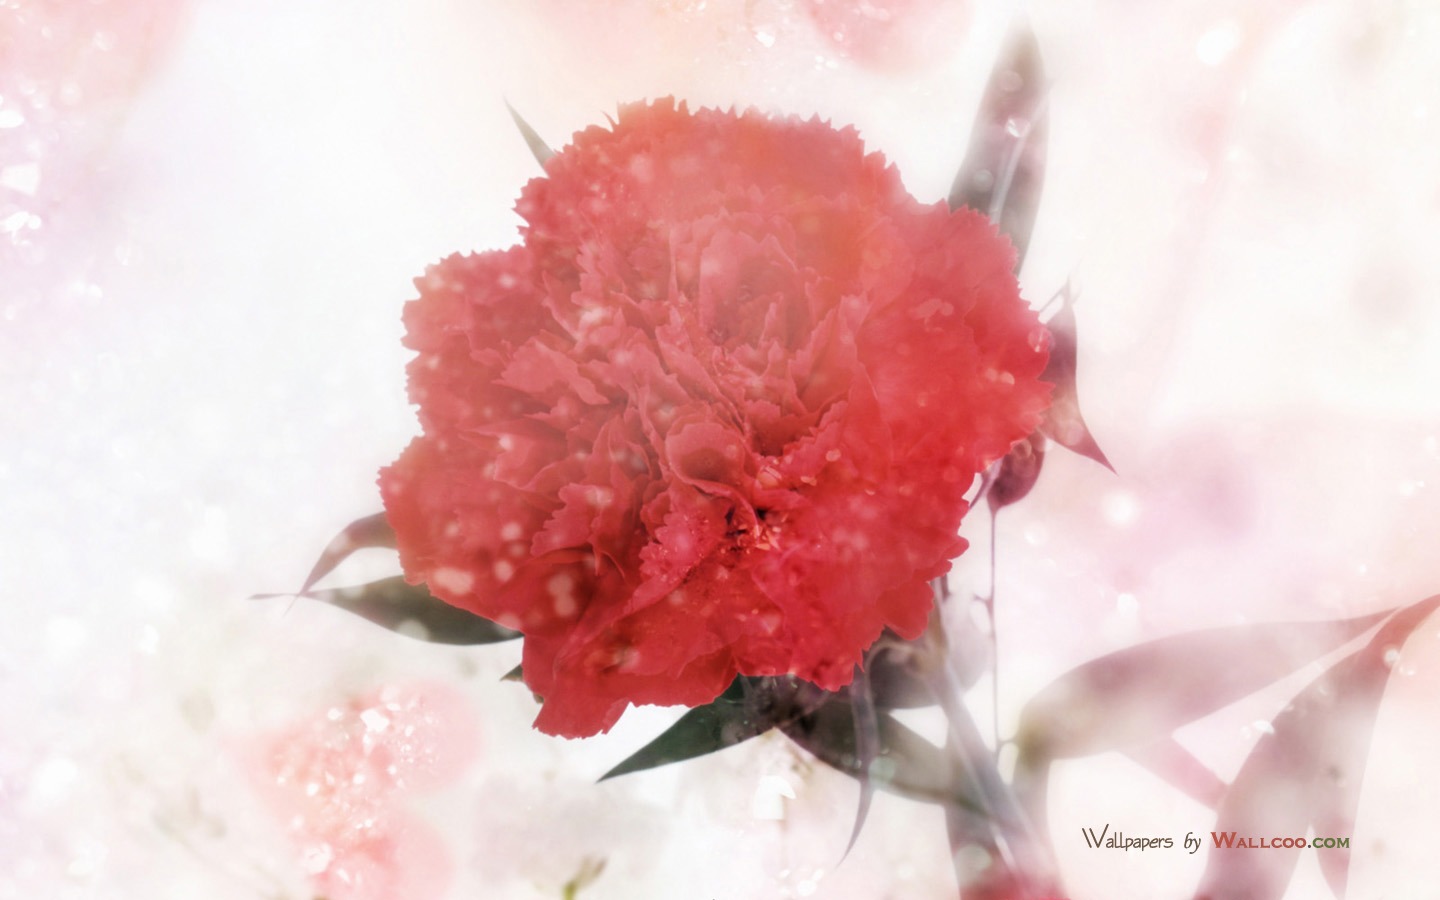 Mother's Day of the carnation wallpaper albums #41 - 1440x900